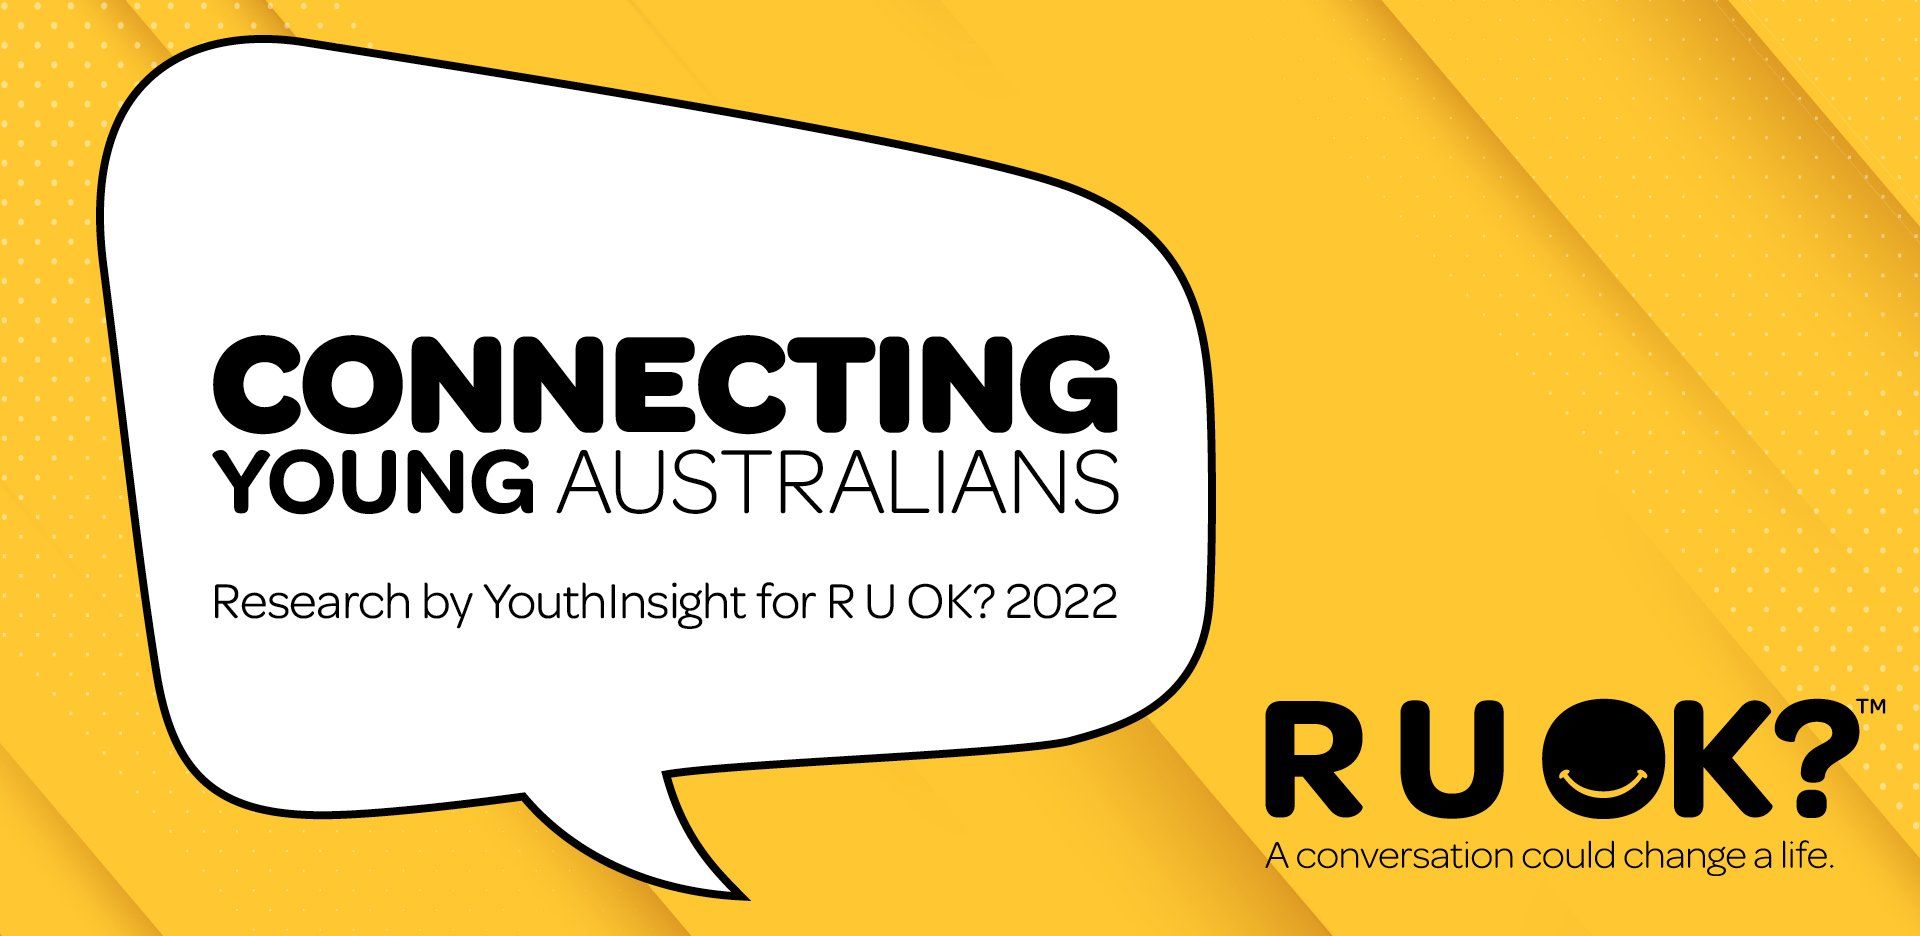 The cover of the Connecting Young Australians report